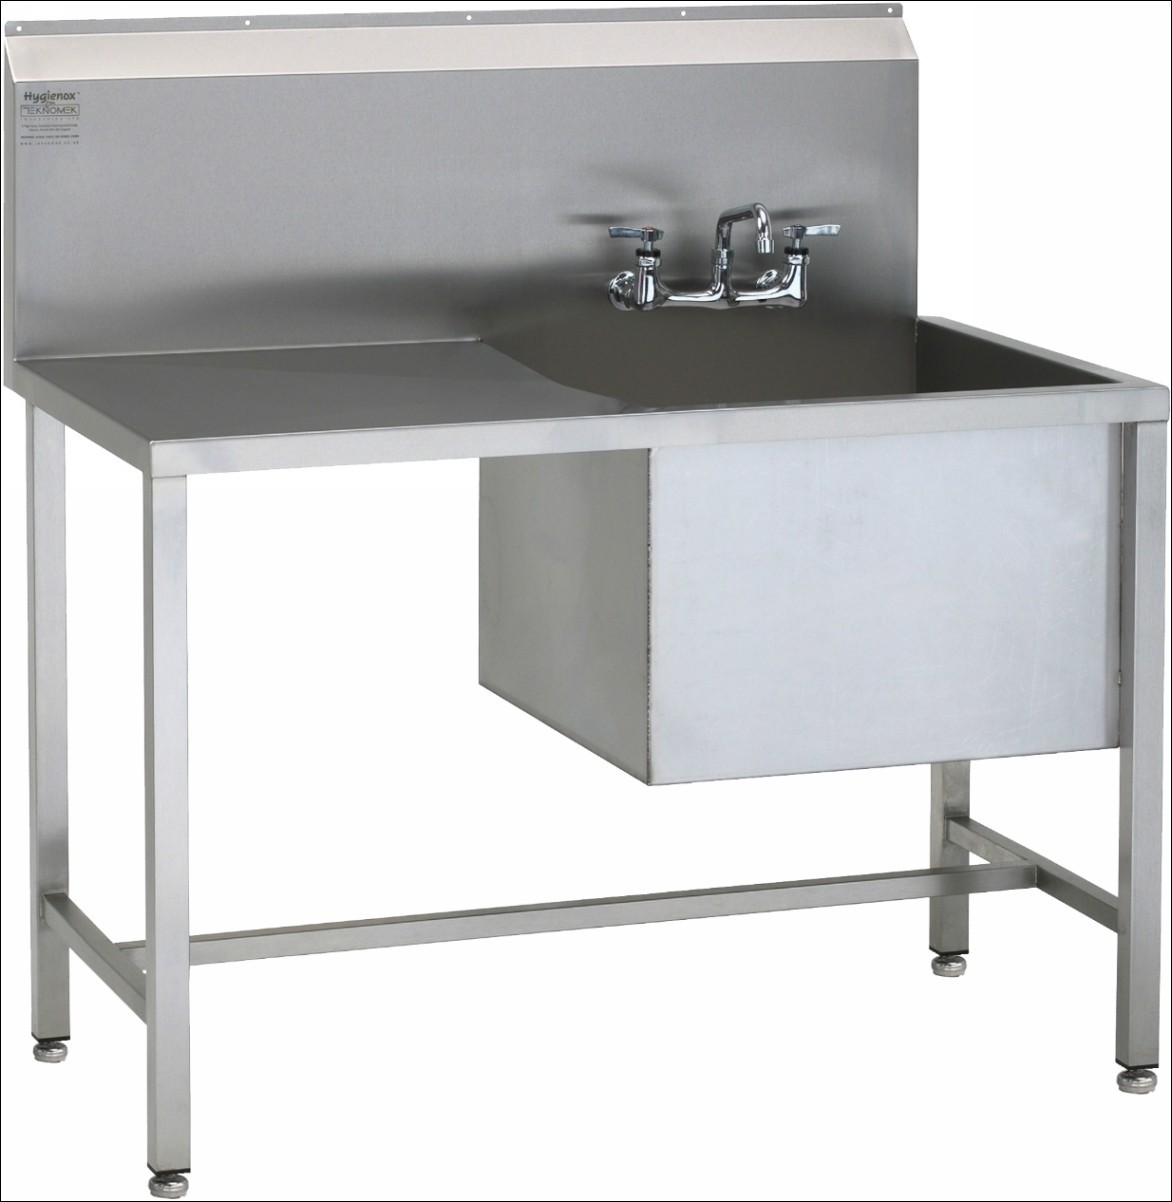 30 inch stainless steel utility sink